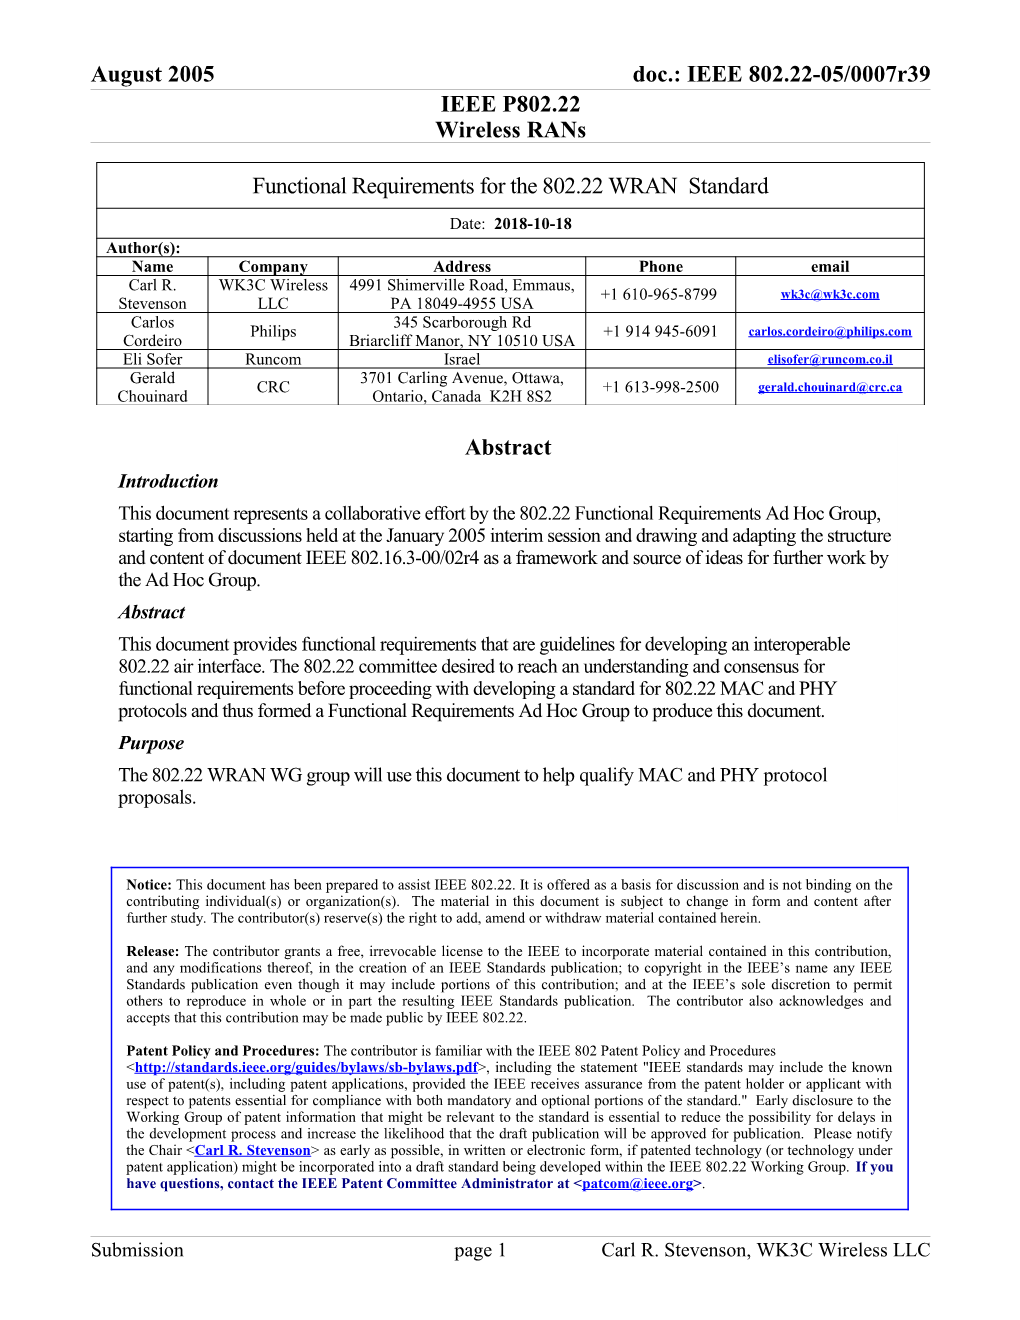 Functional Requirements for the 802.22 WRAN Standard